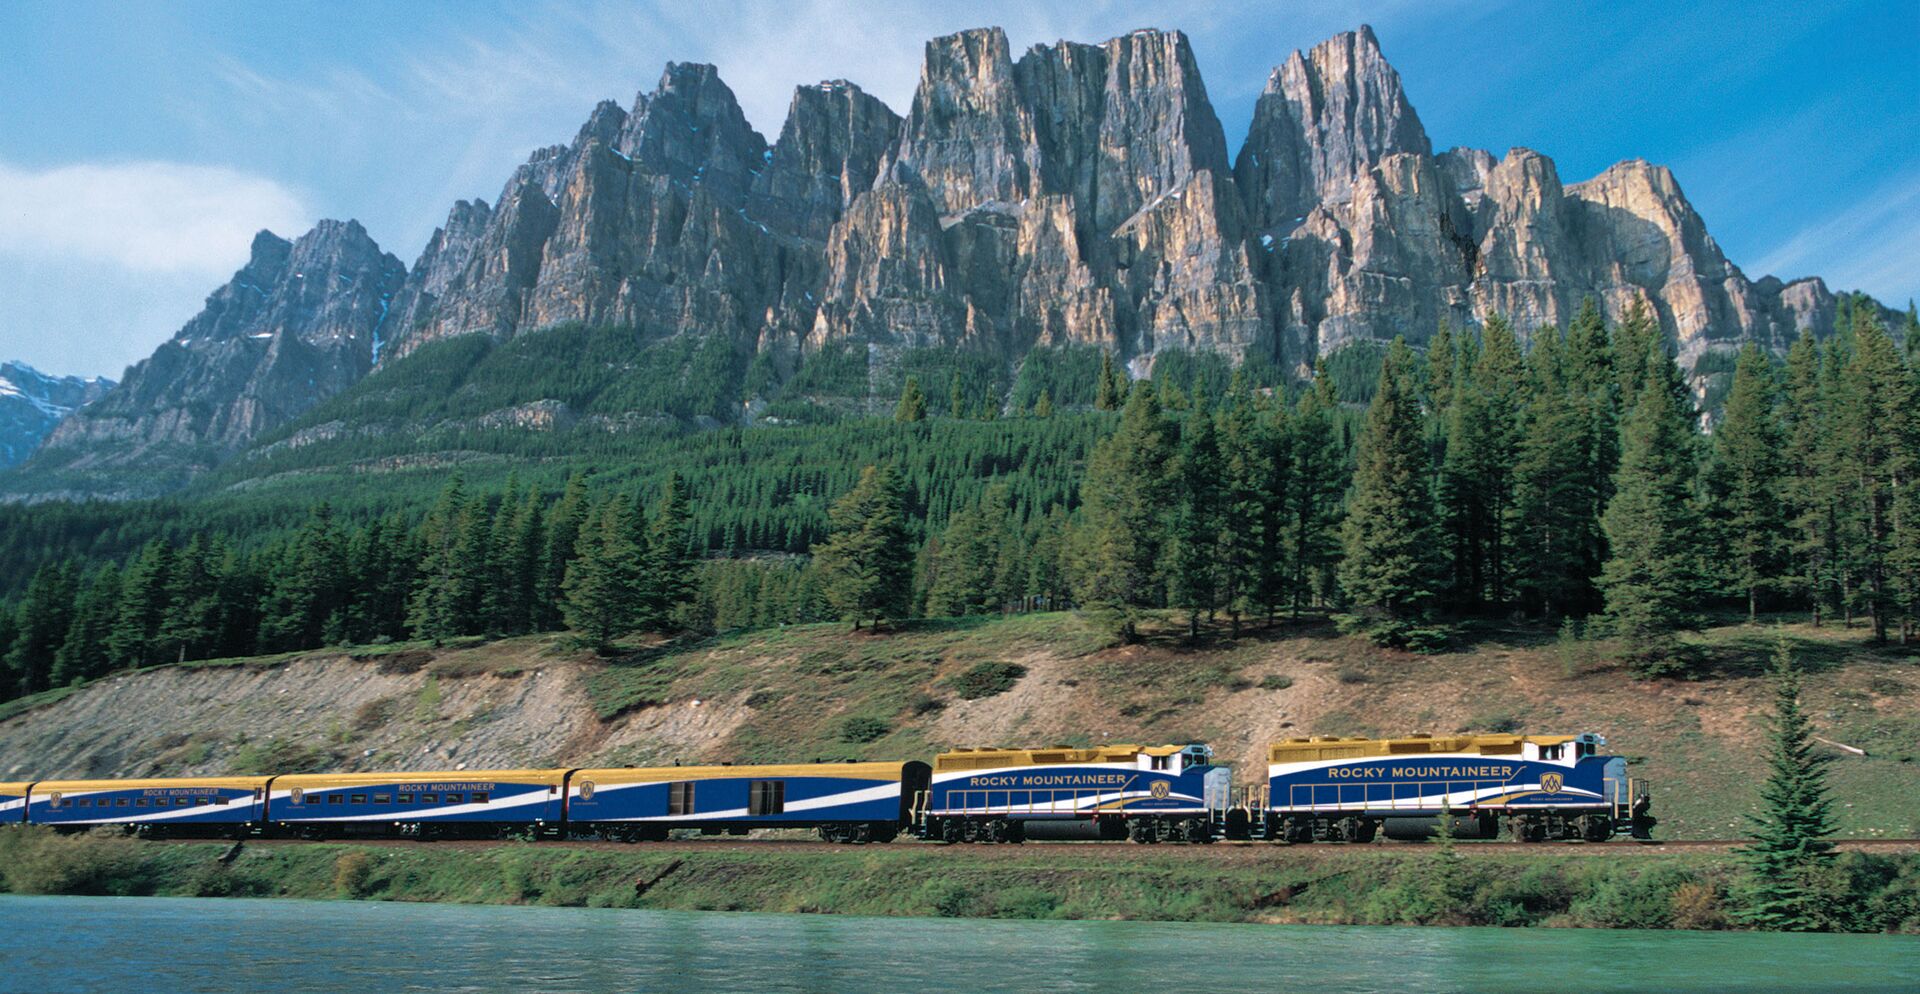 The Rocky Mountaineer train passing a lake and mountains 